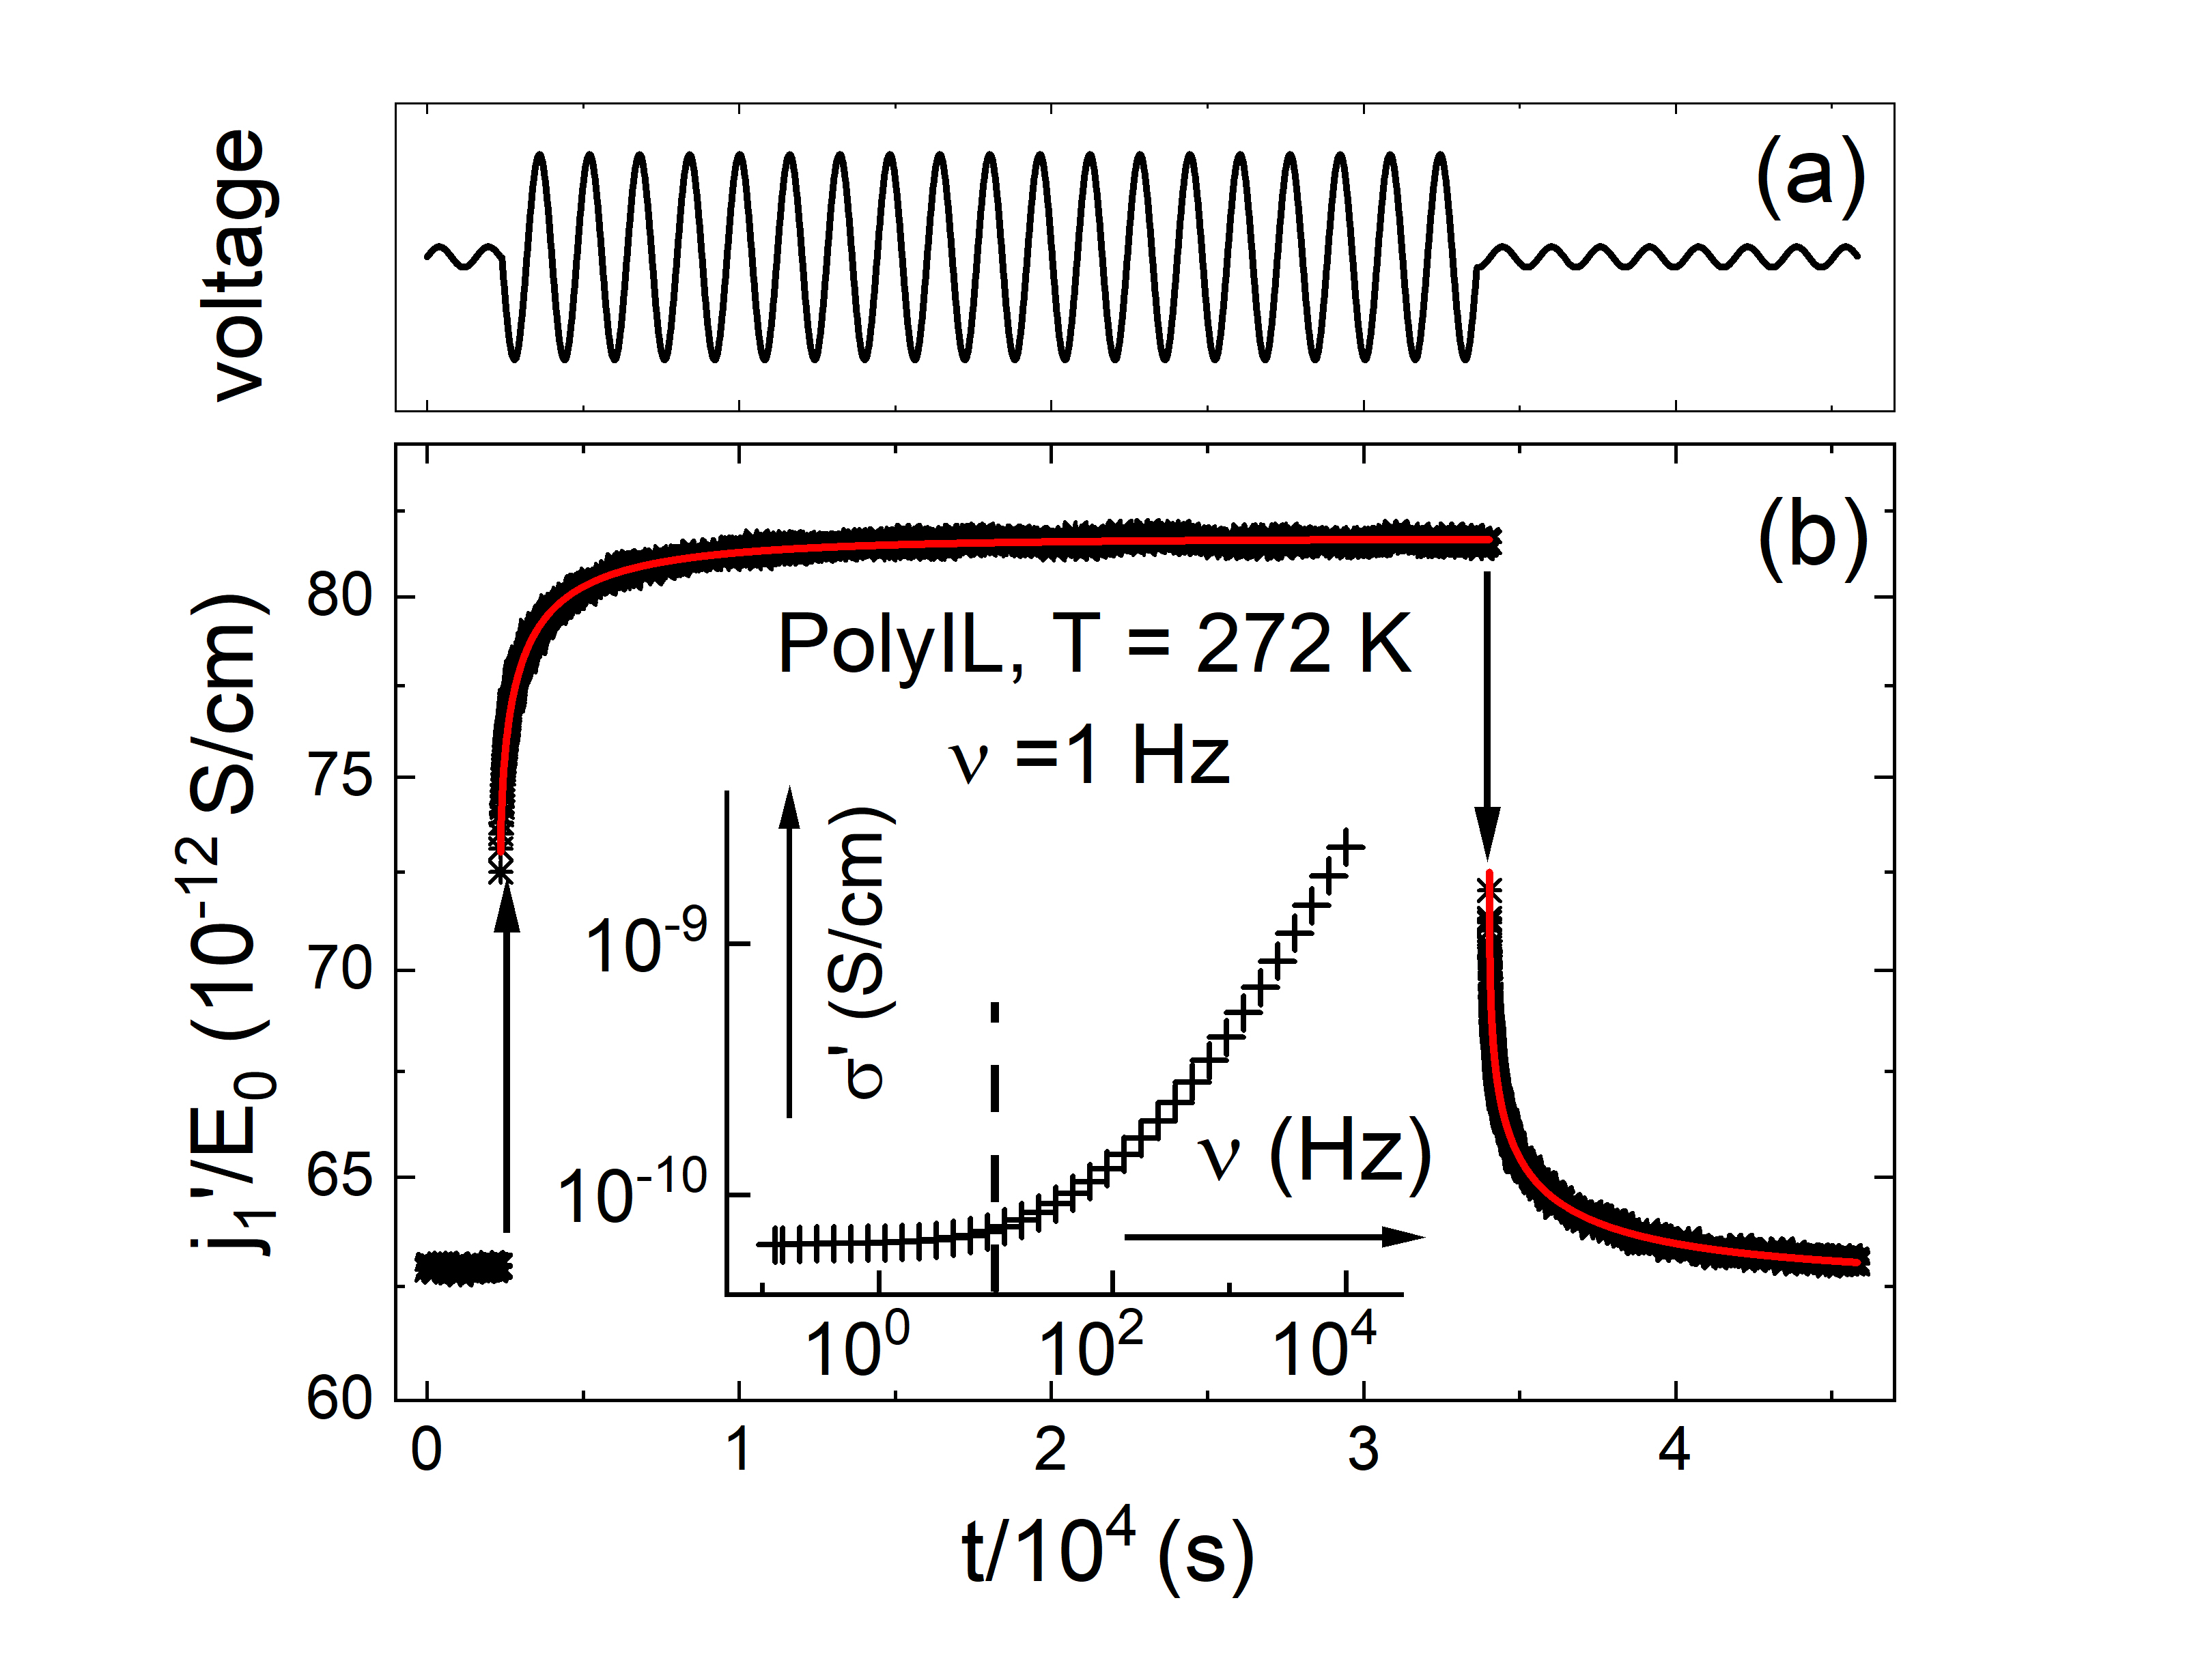 Fig 1. (a) Schematic voltage profile used in the transient nonlinear investigations. (b) Time-resolved conductivity of a PolyIL at 272 K, probed at 1 HZ with an AC field with E_0 varying stepwise from 3 to 100 kV/cm and back to 3 kV/c.